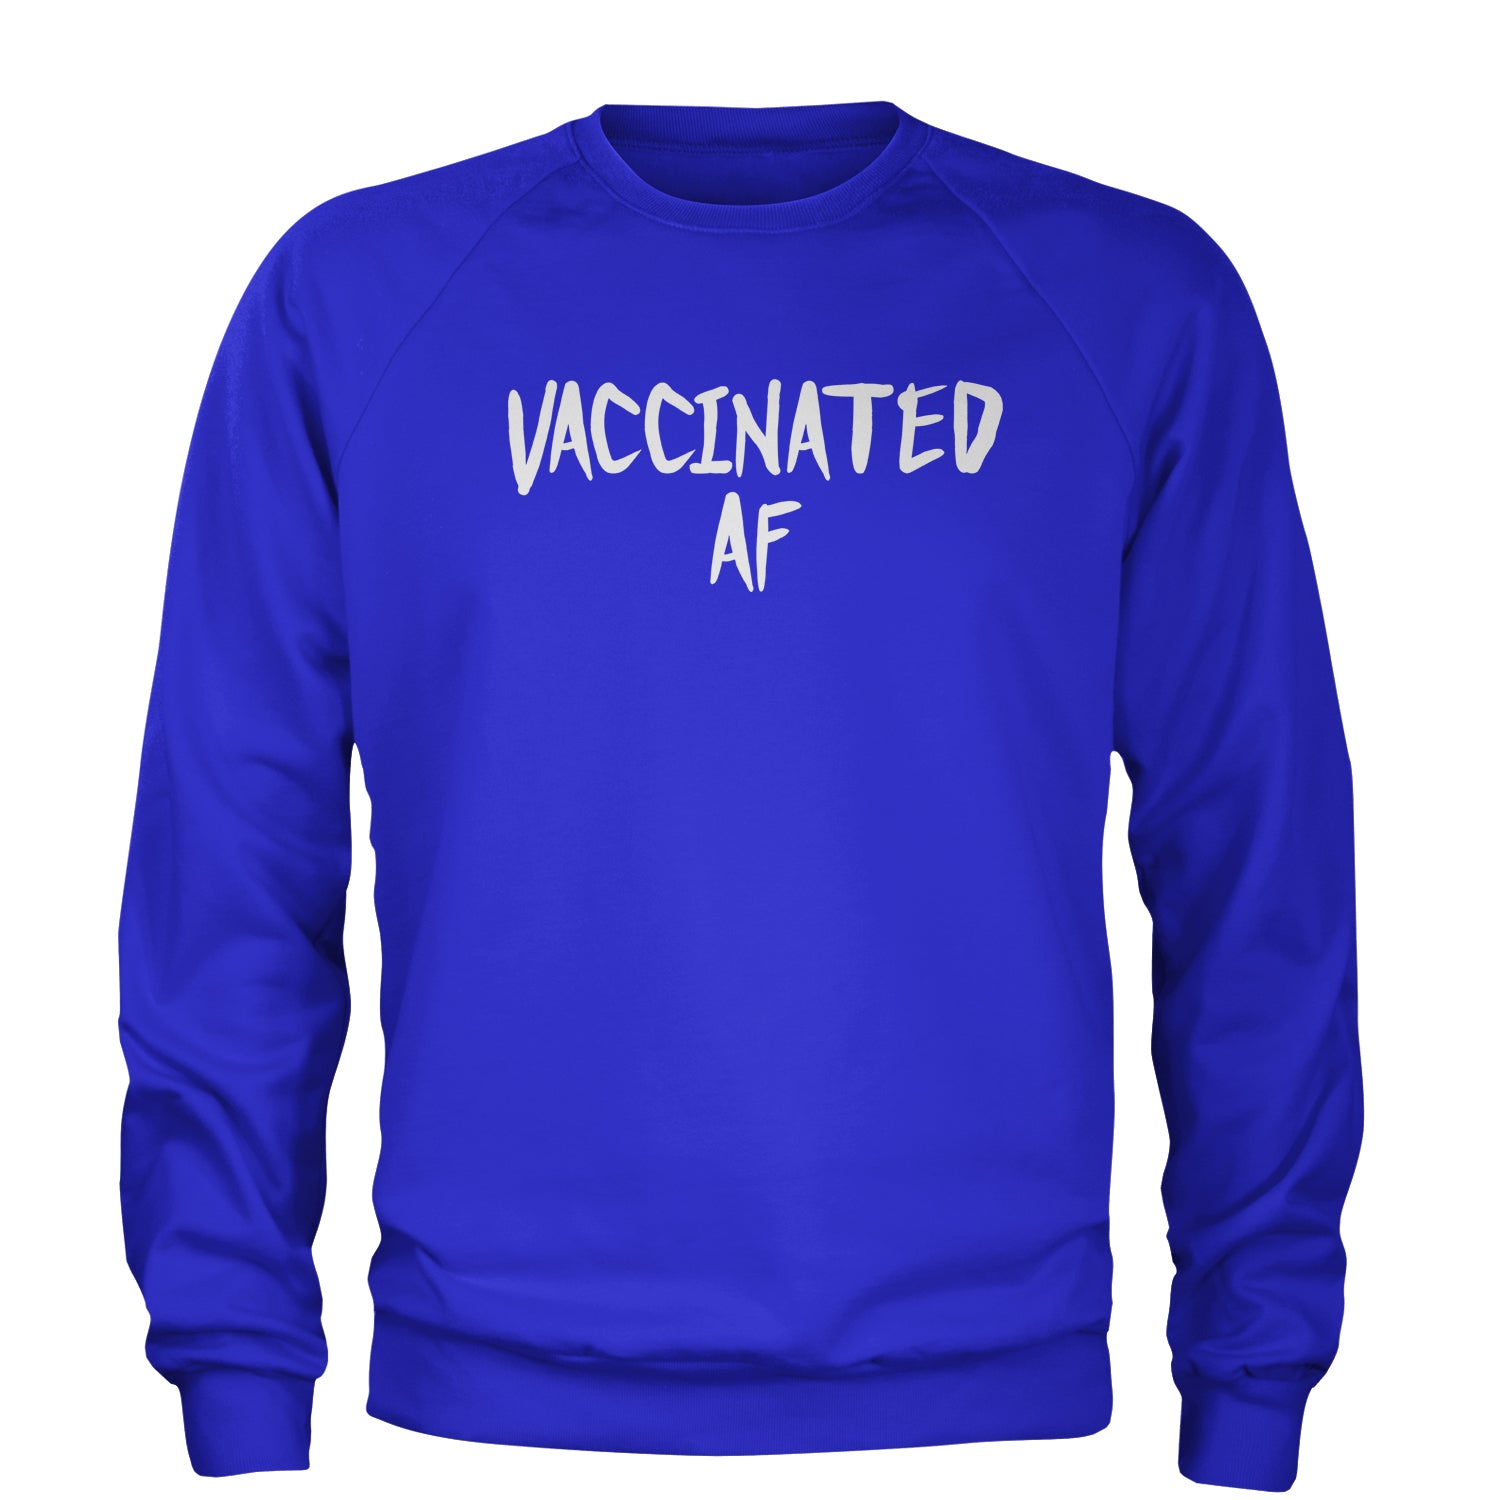 Vaccinated AF Pro Vaccine Funny Vaccination Health Adult Crewneck Sweatshirt moderna, pfizer, vaccine, vax, vaxx by Expression Tees